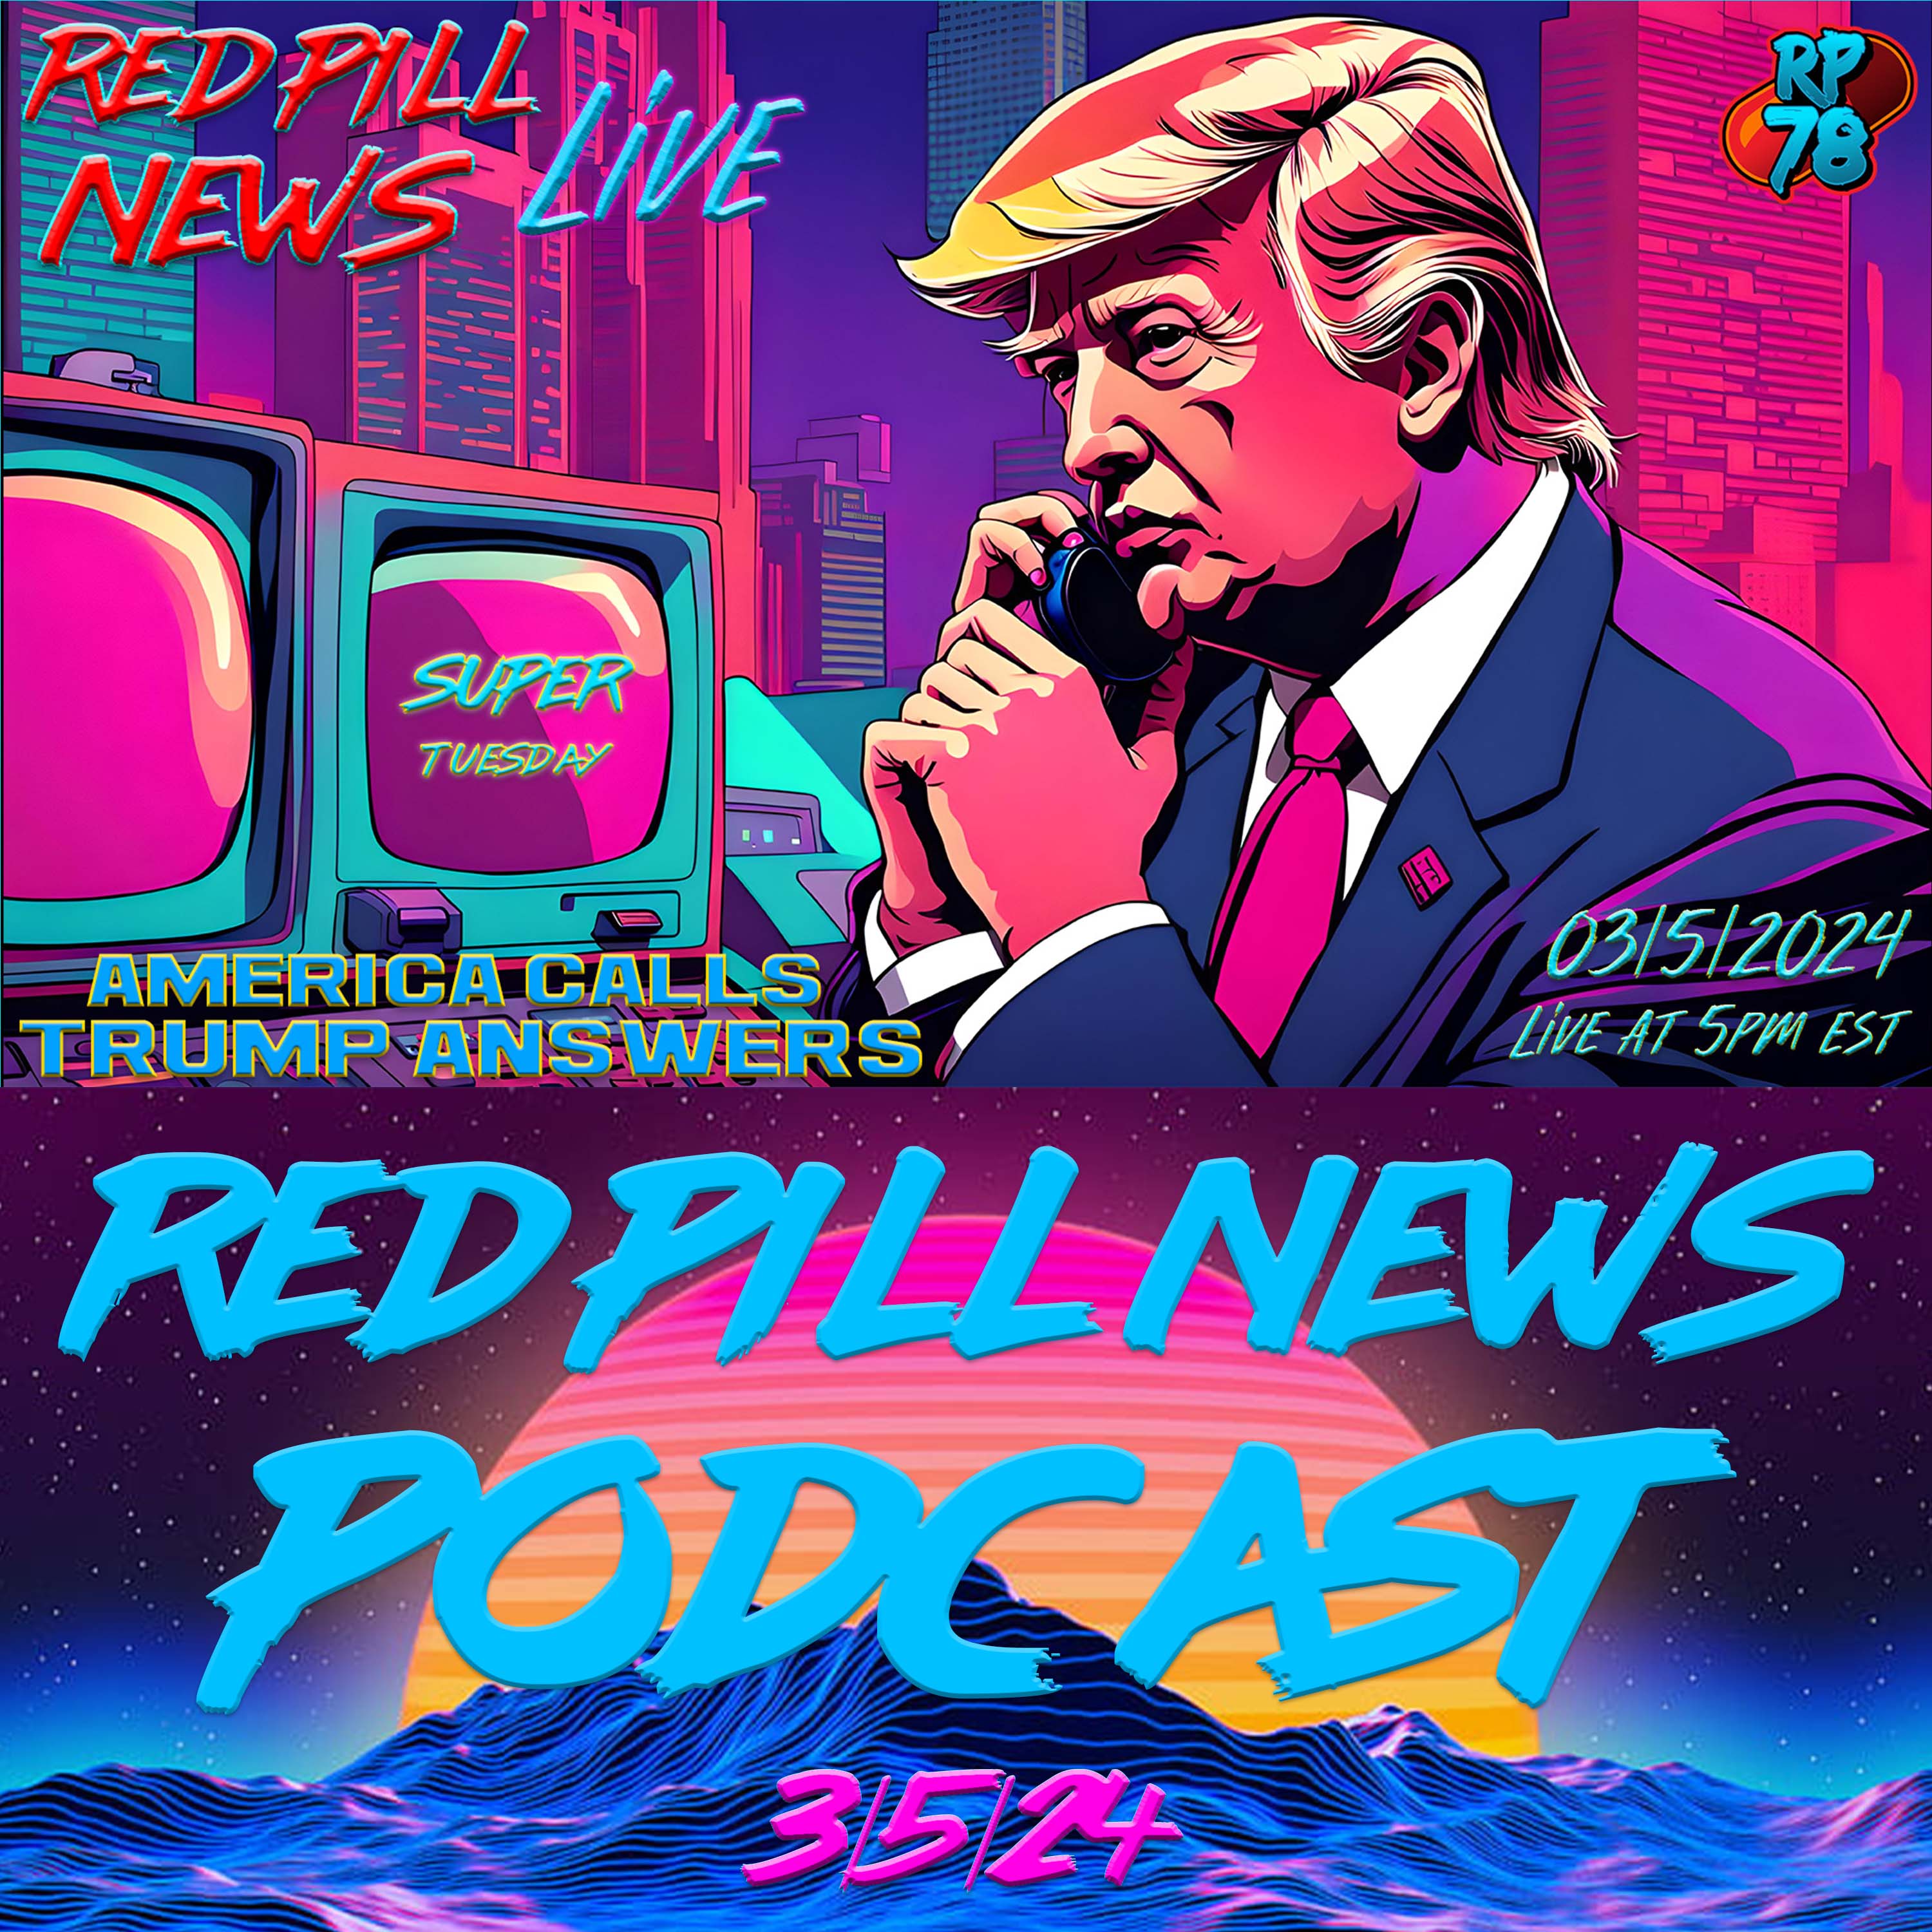 Super Tuesday! 16 Vote To Hand Trump the Nomination on Red Pill News Live